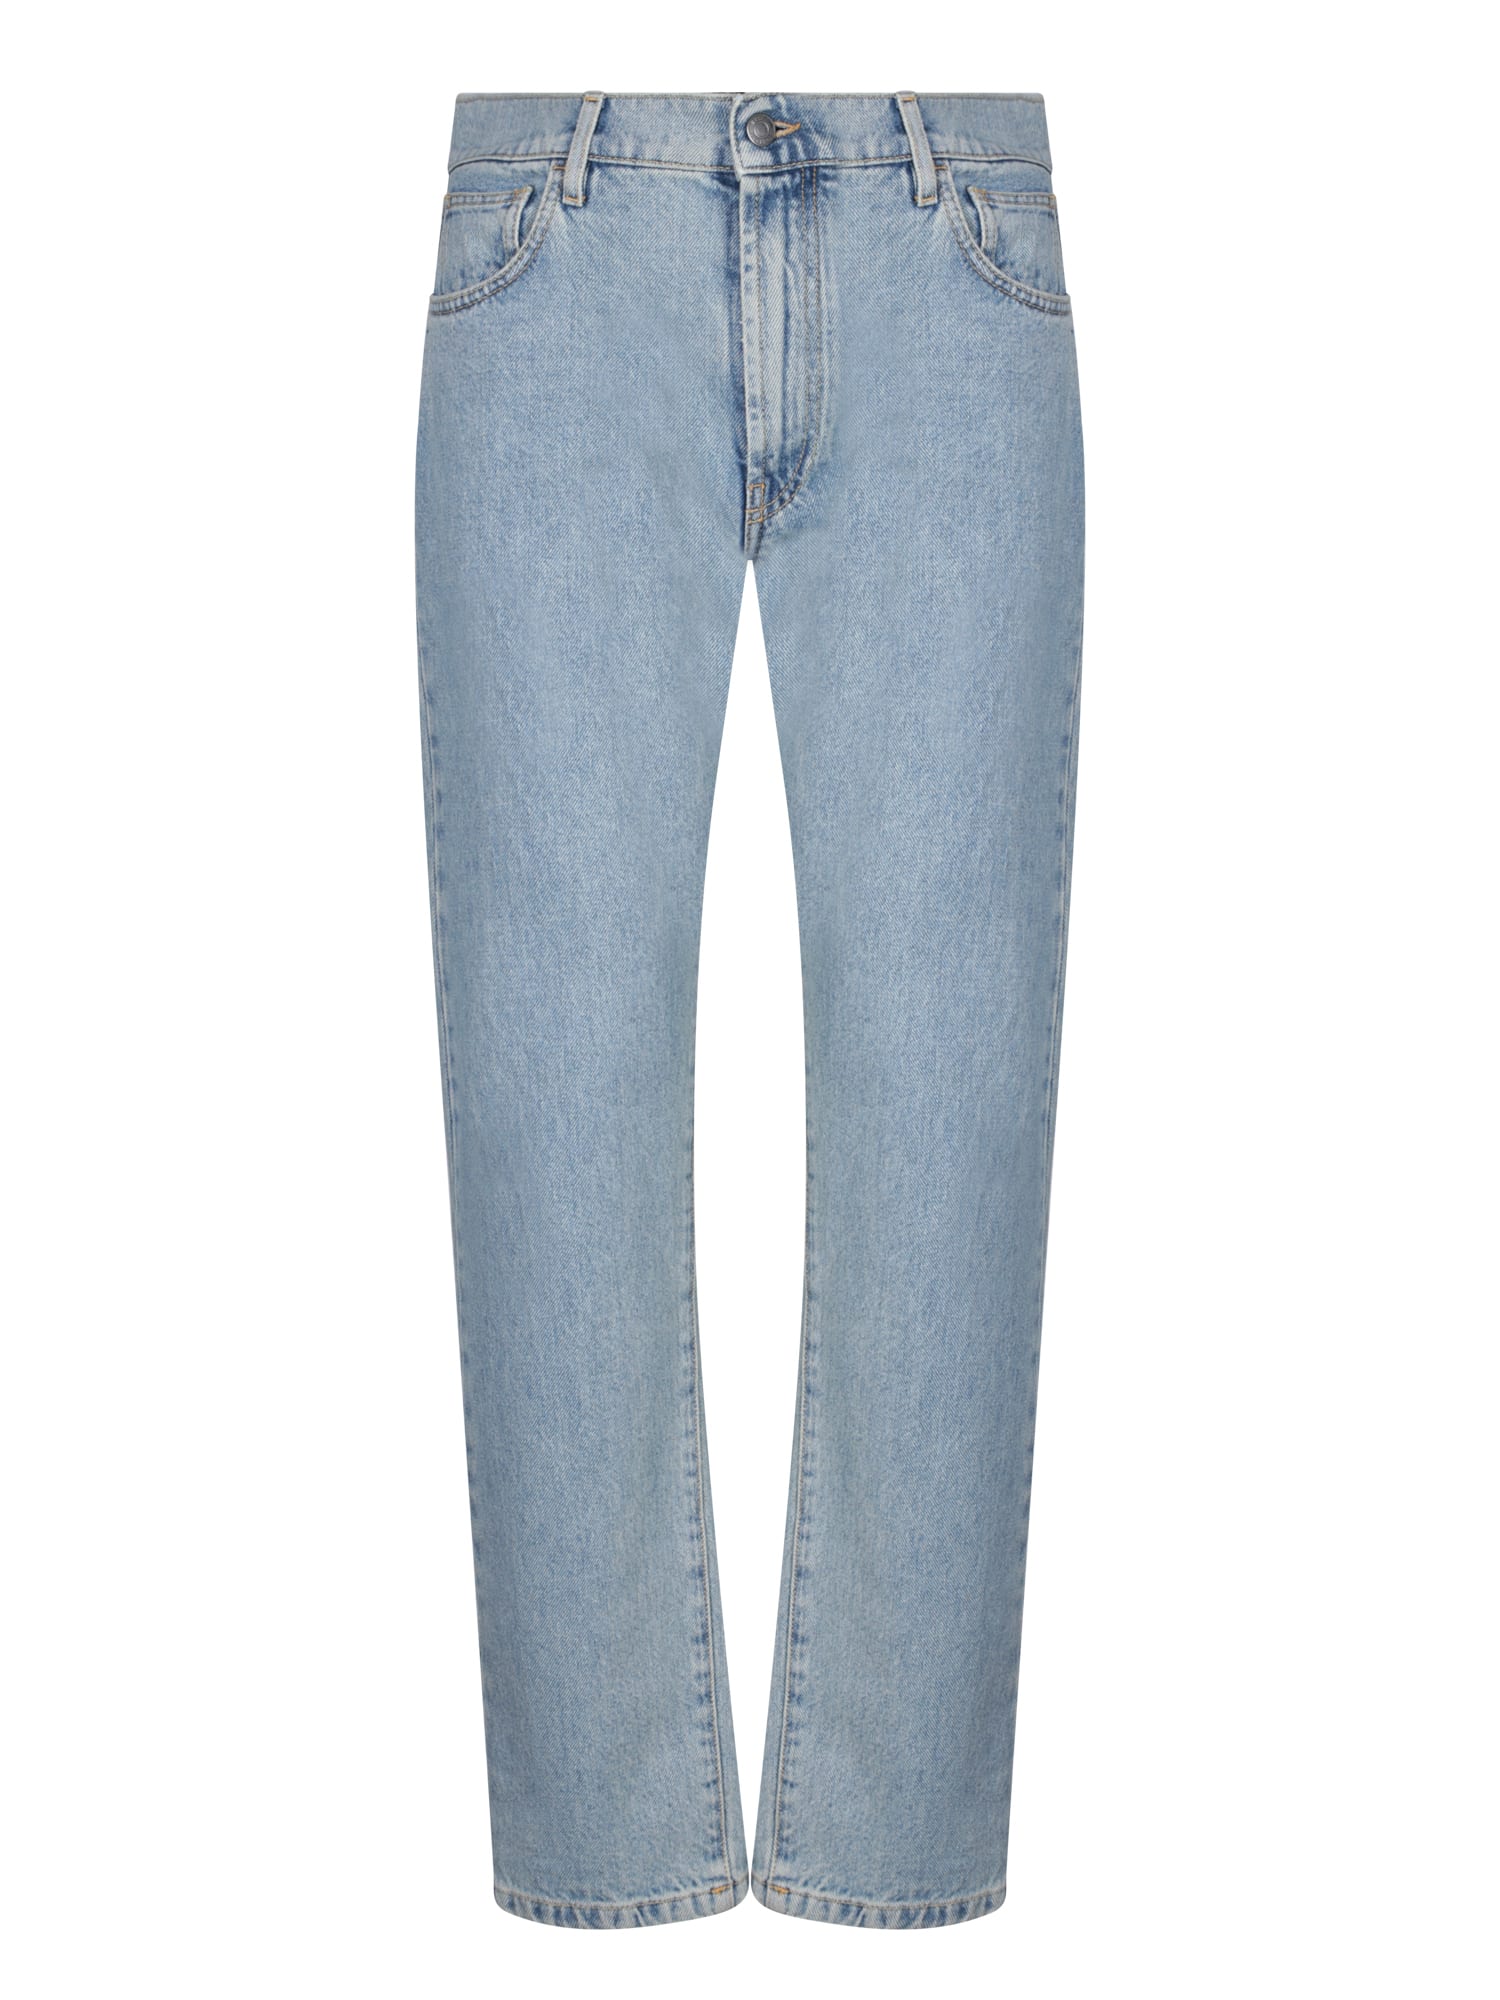 Shop Moschino Regular Fit Blue Jeans By